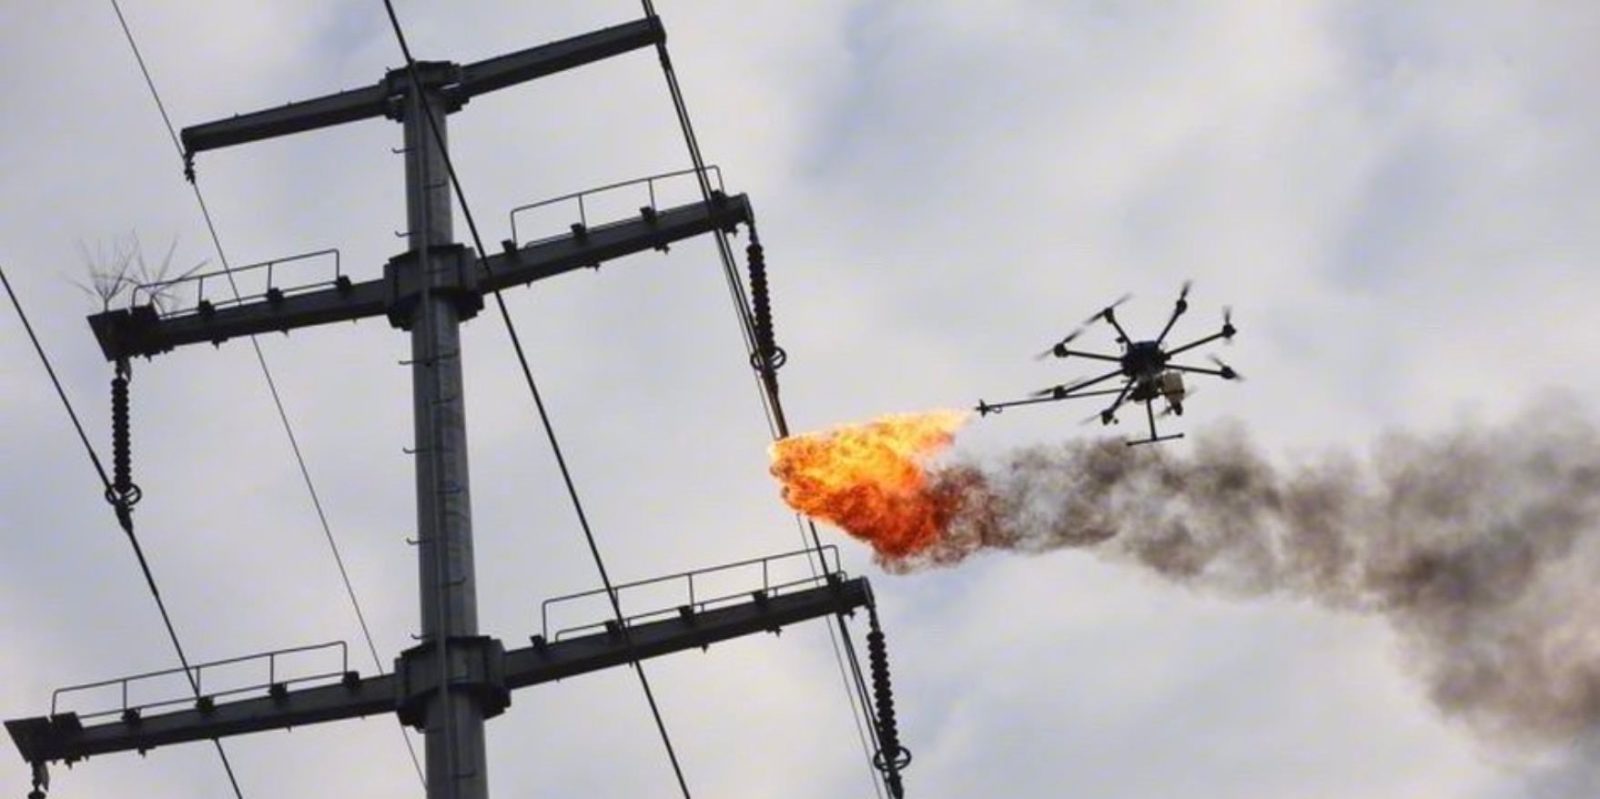 Cleaning power lines is easy when you have a flame-throwing drone0000